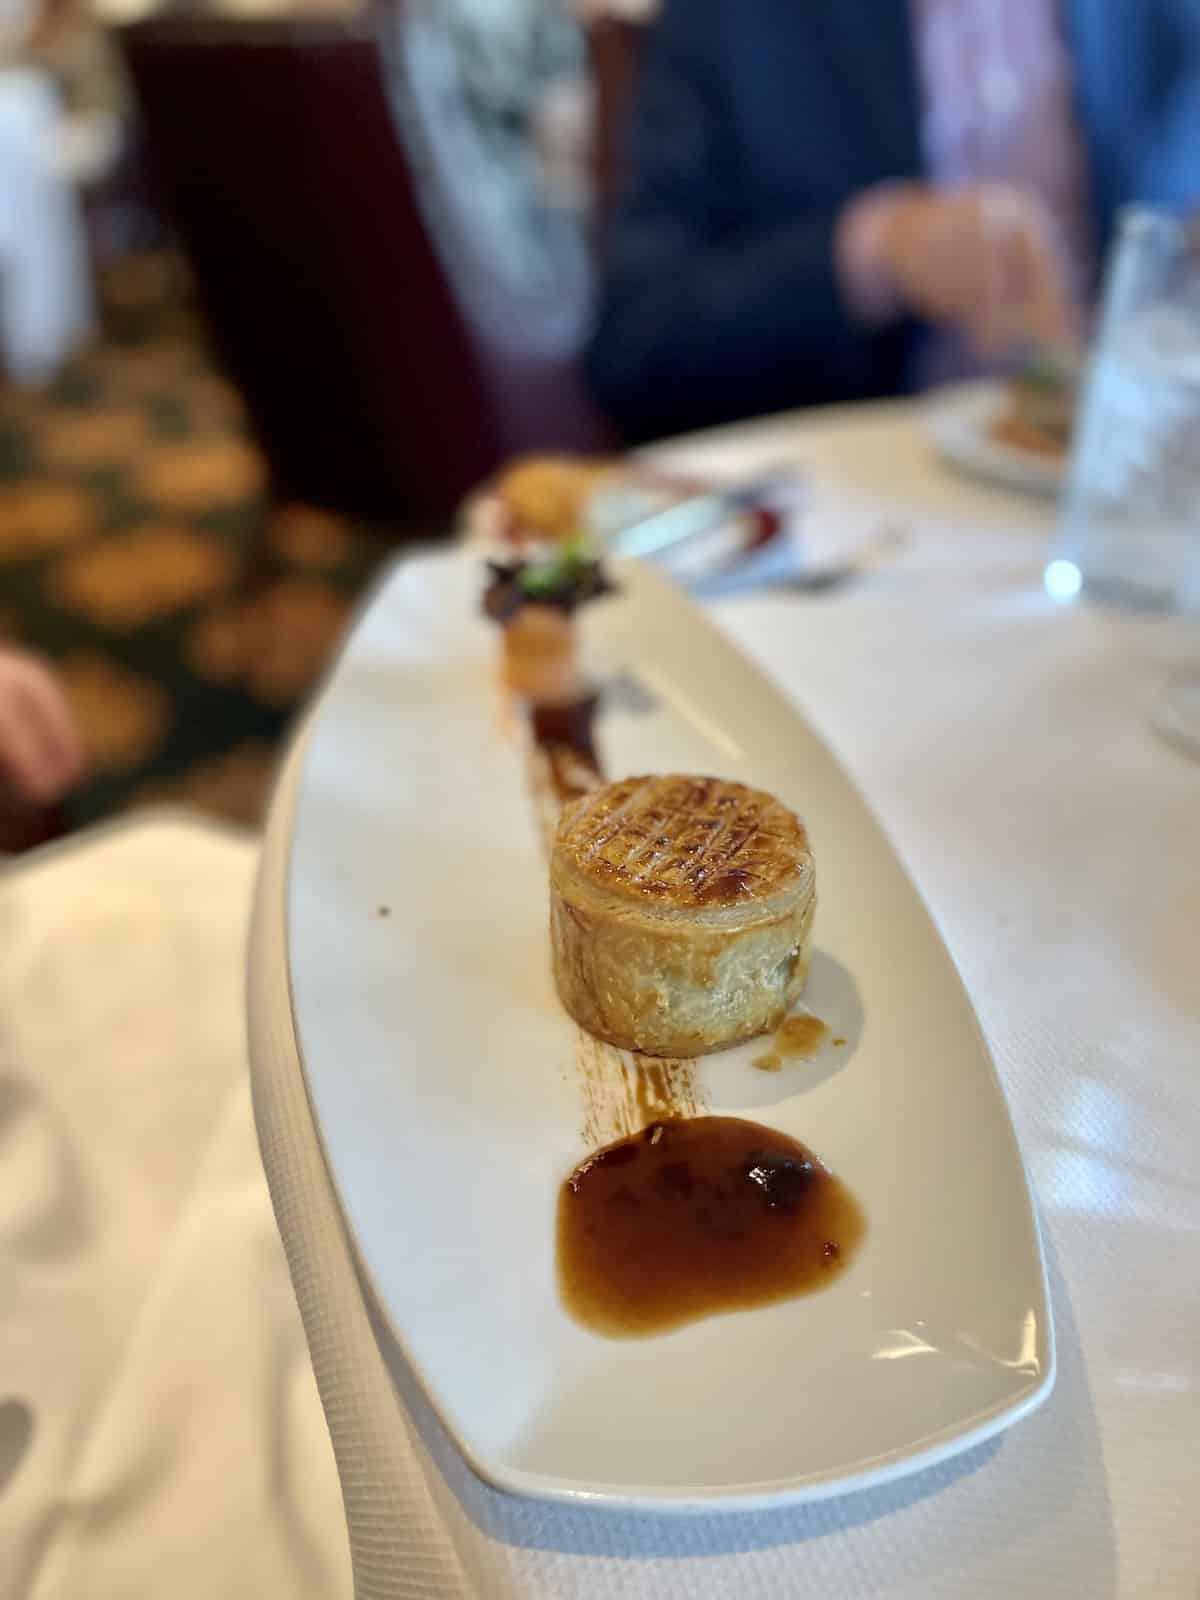 Puff pastry with meat inside and gravy on plate.